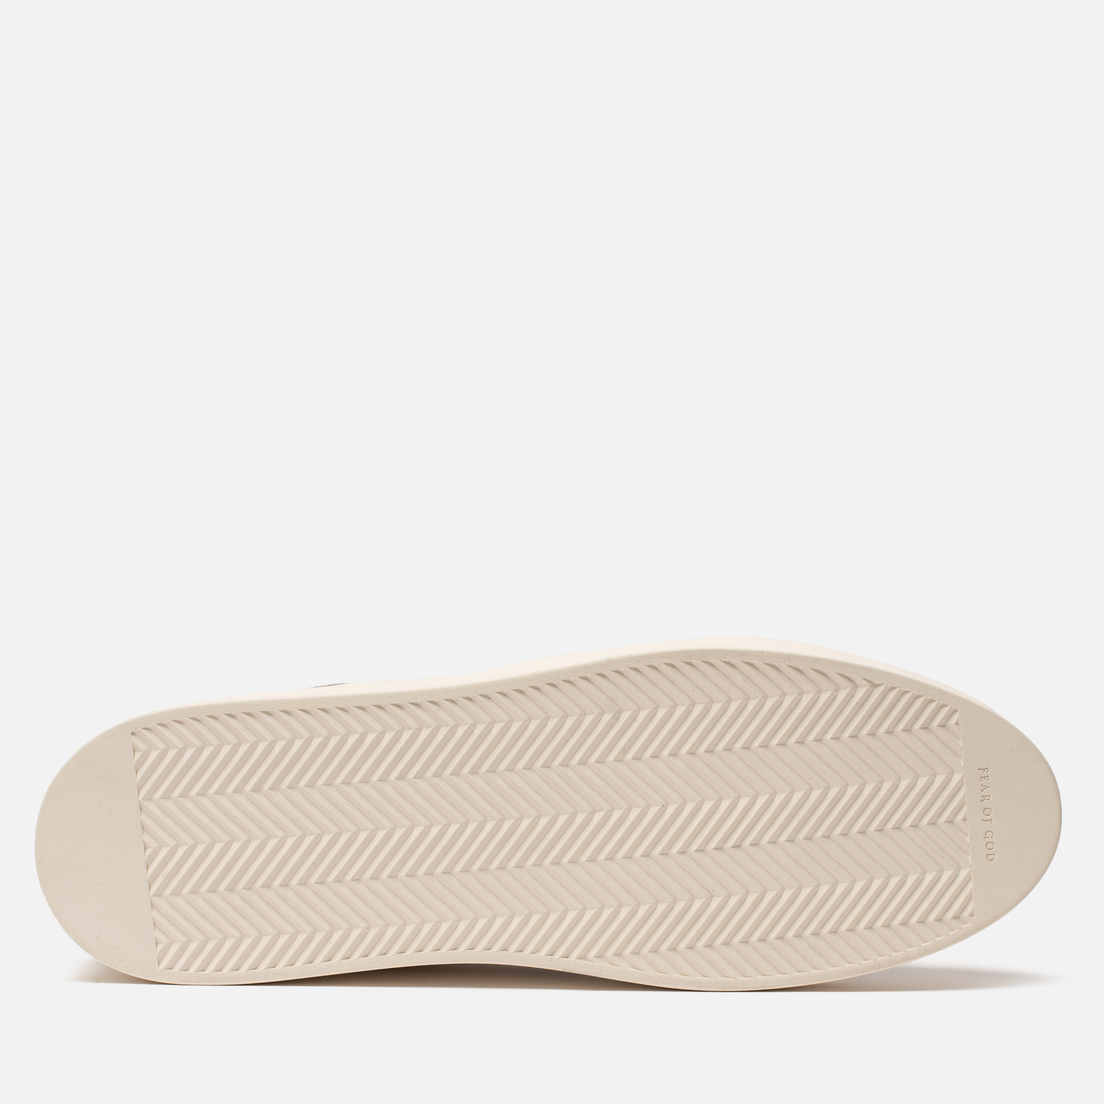 Fear of God Мужские кроссовки Strapless Skate Mid Suede/Canvas